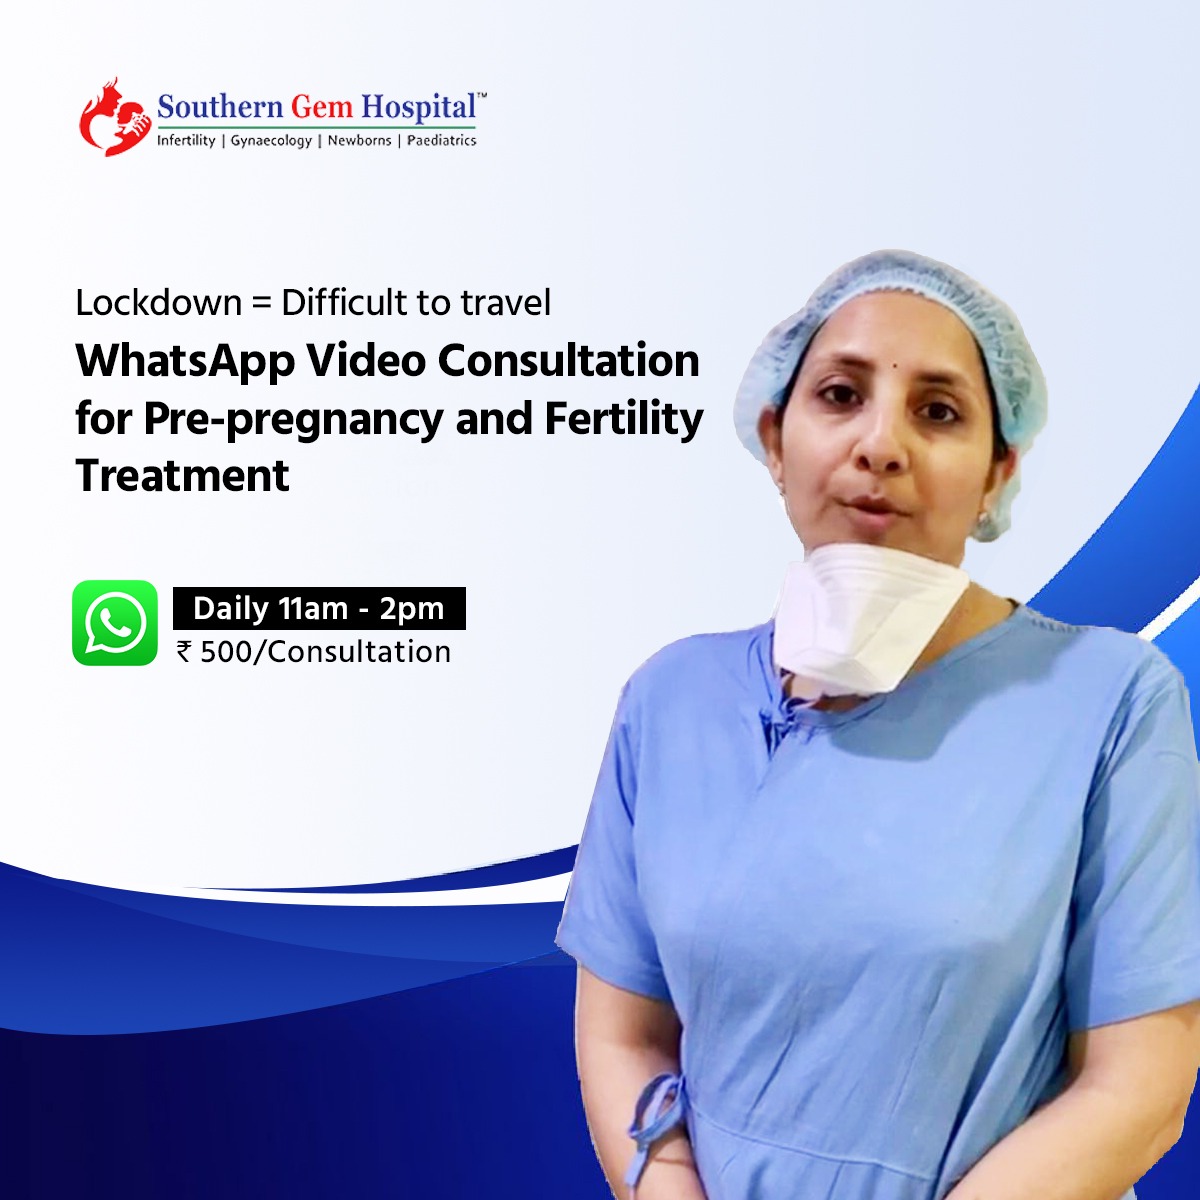 Whatsapp Video Consultation for Pre-pregnancy & Infertility by Dr Sweta Agarwal, Southern Gem Hospital, Hyderabad 

Book your slot here bit.ly/gynaec-smo or call 040 66585555
Time: 12pm-2pm Mon-Sat
Fee: Rs. 500/-
UPI: SOUTHERNGEMHOSPITAL.42081937@HDFCBANK 
#Covid19